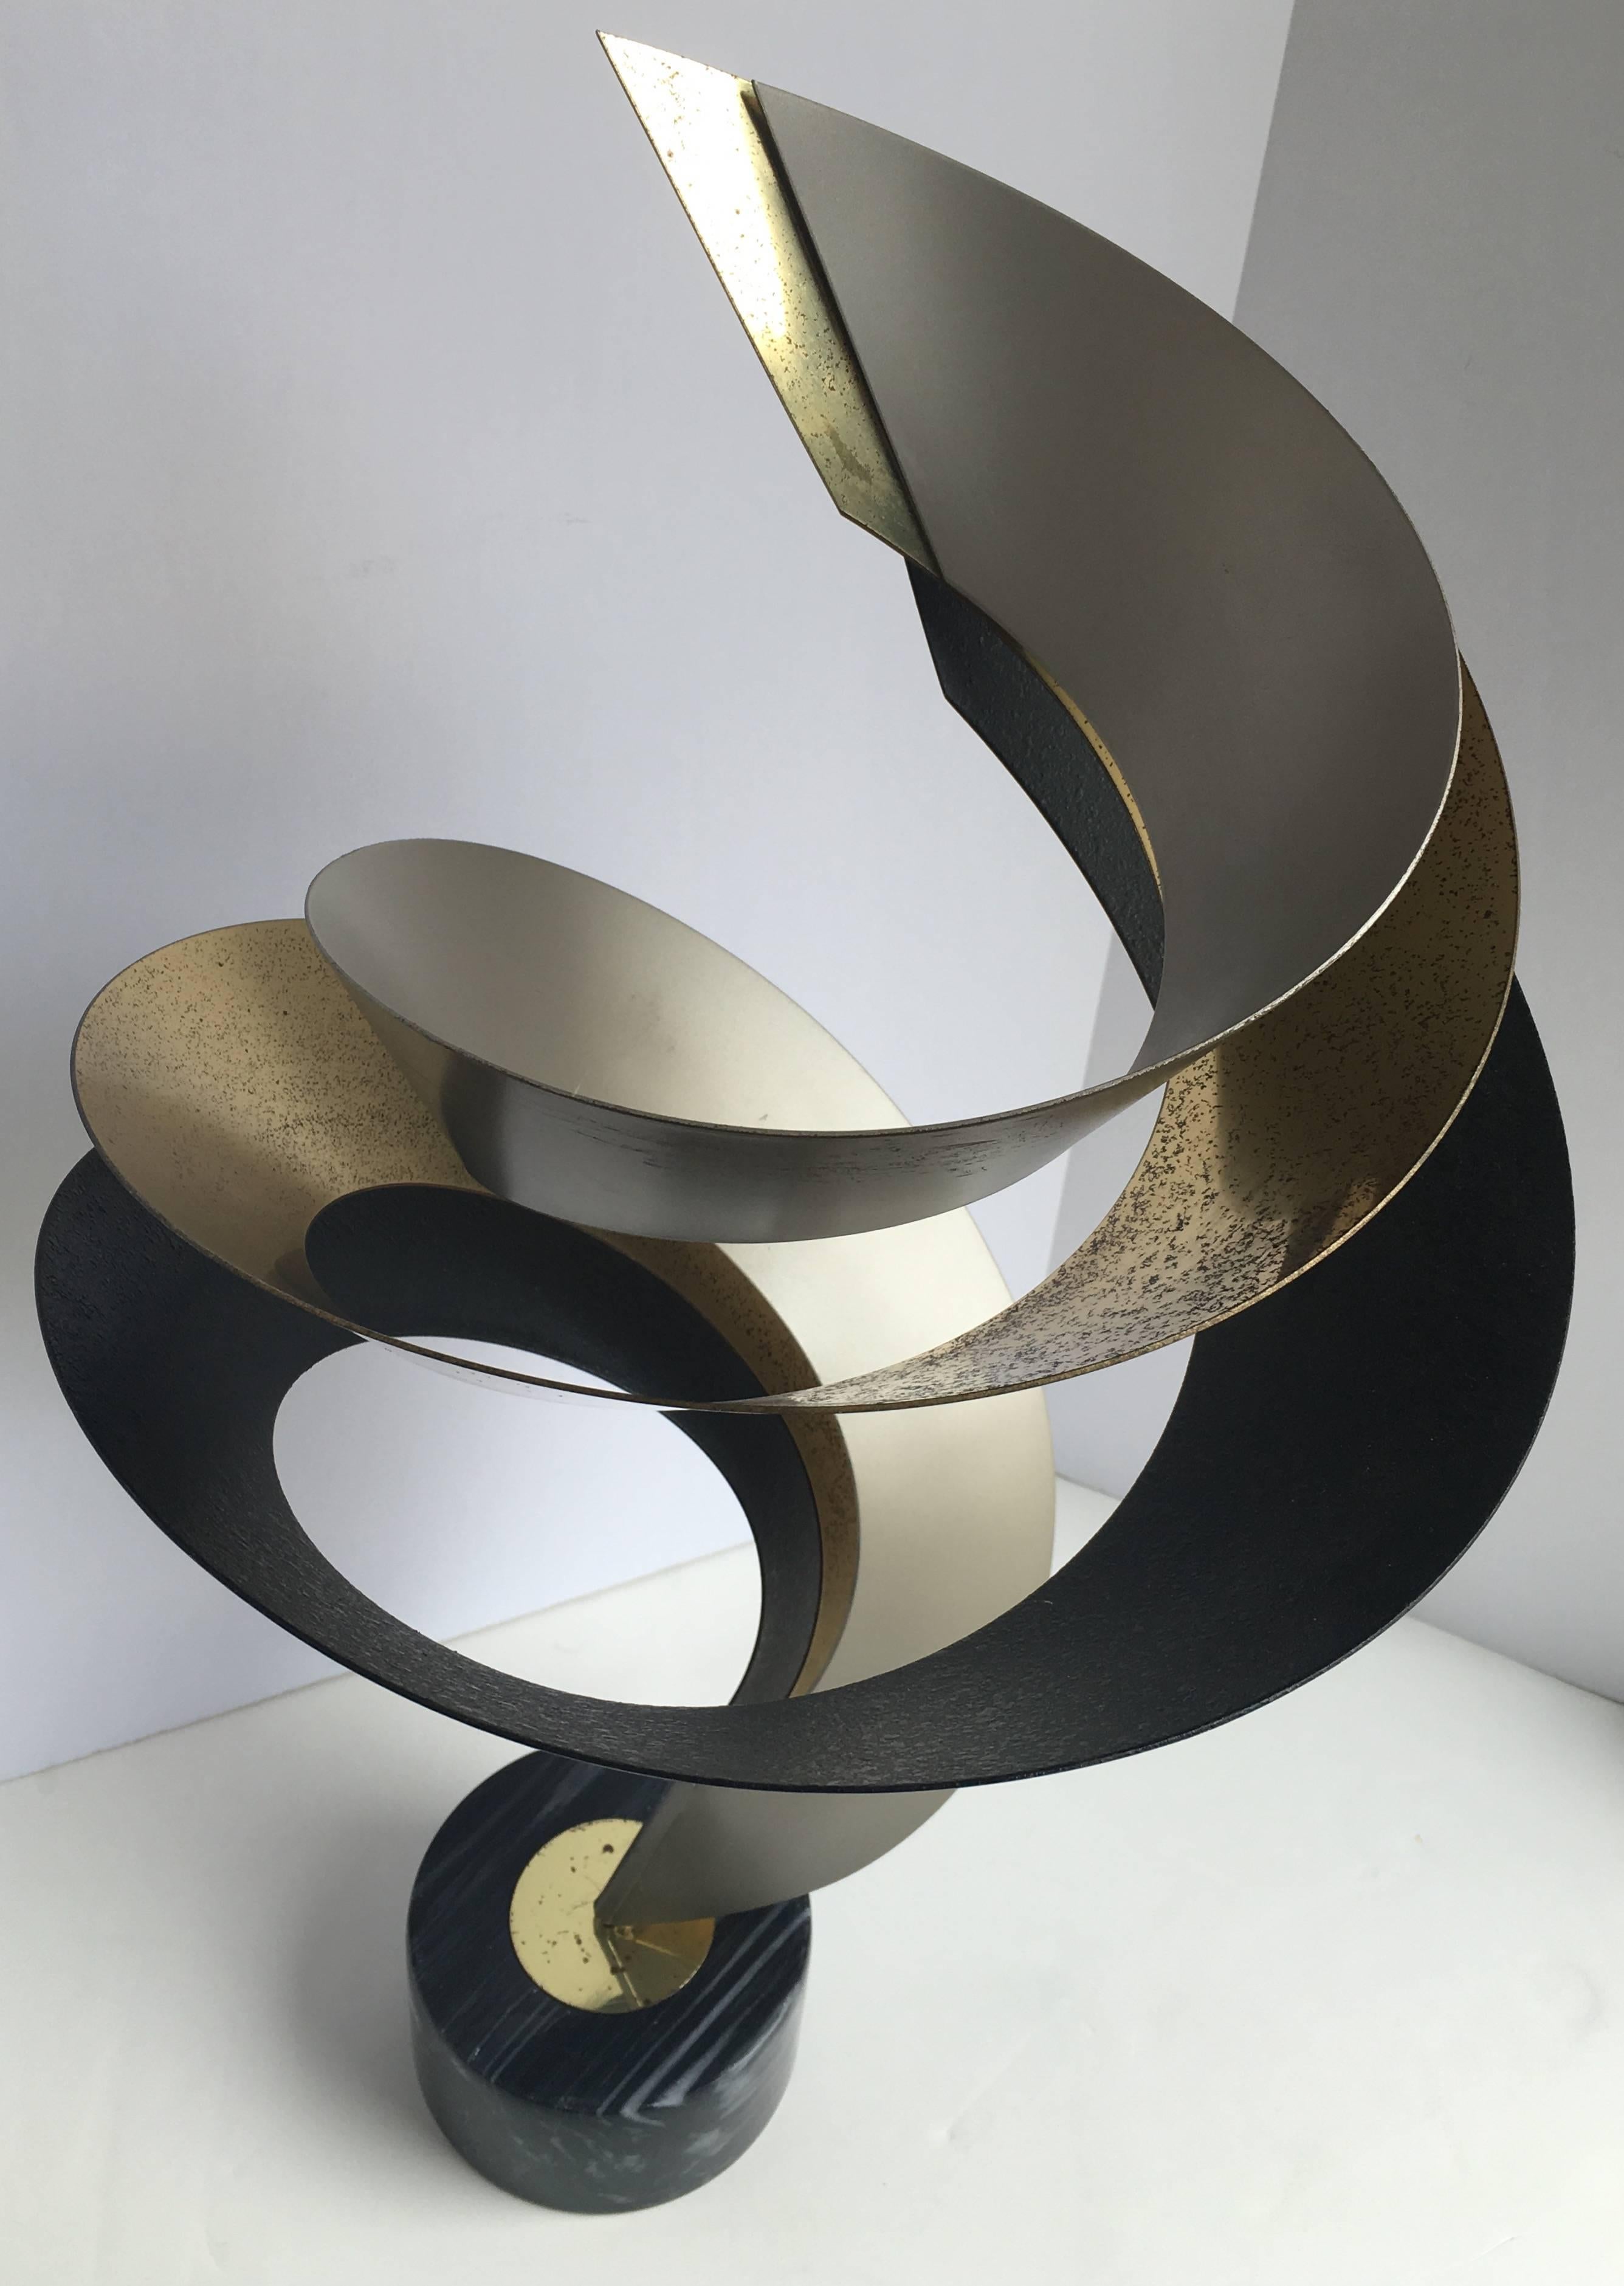 abstract table sculptures